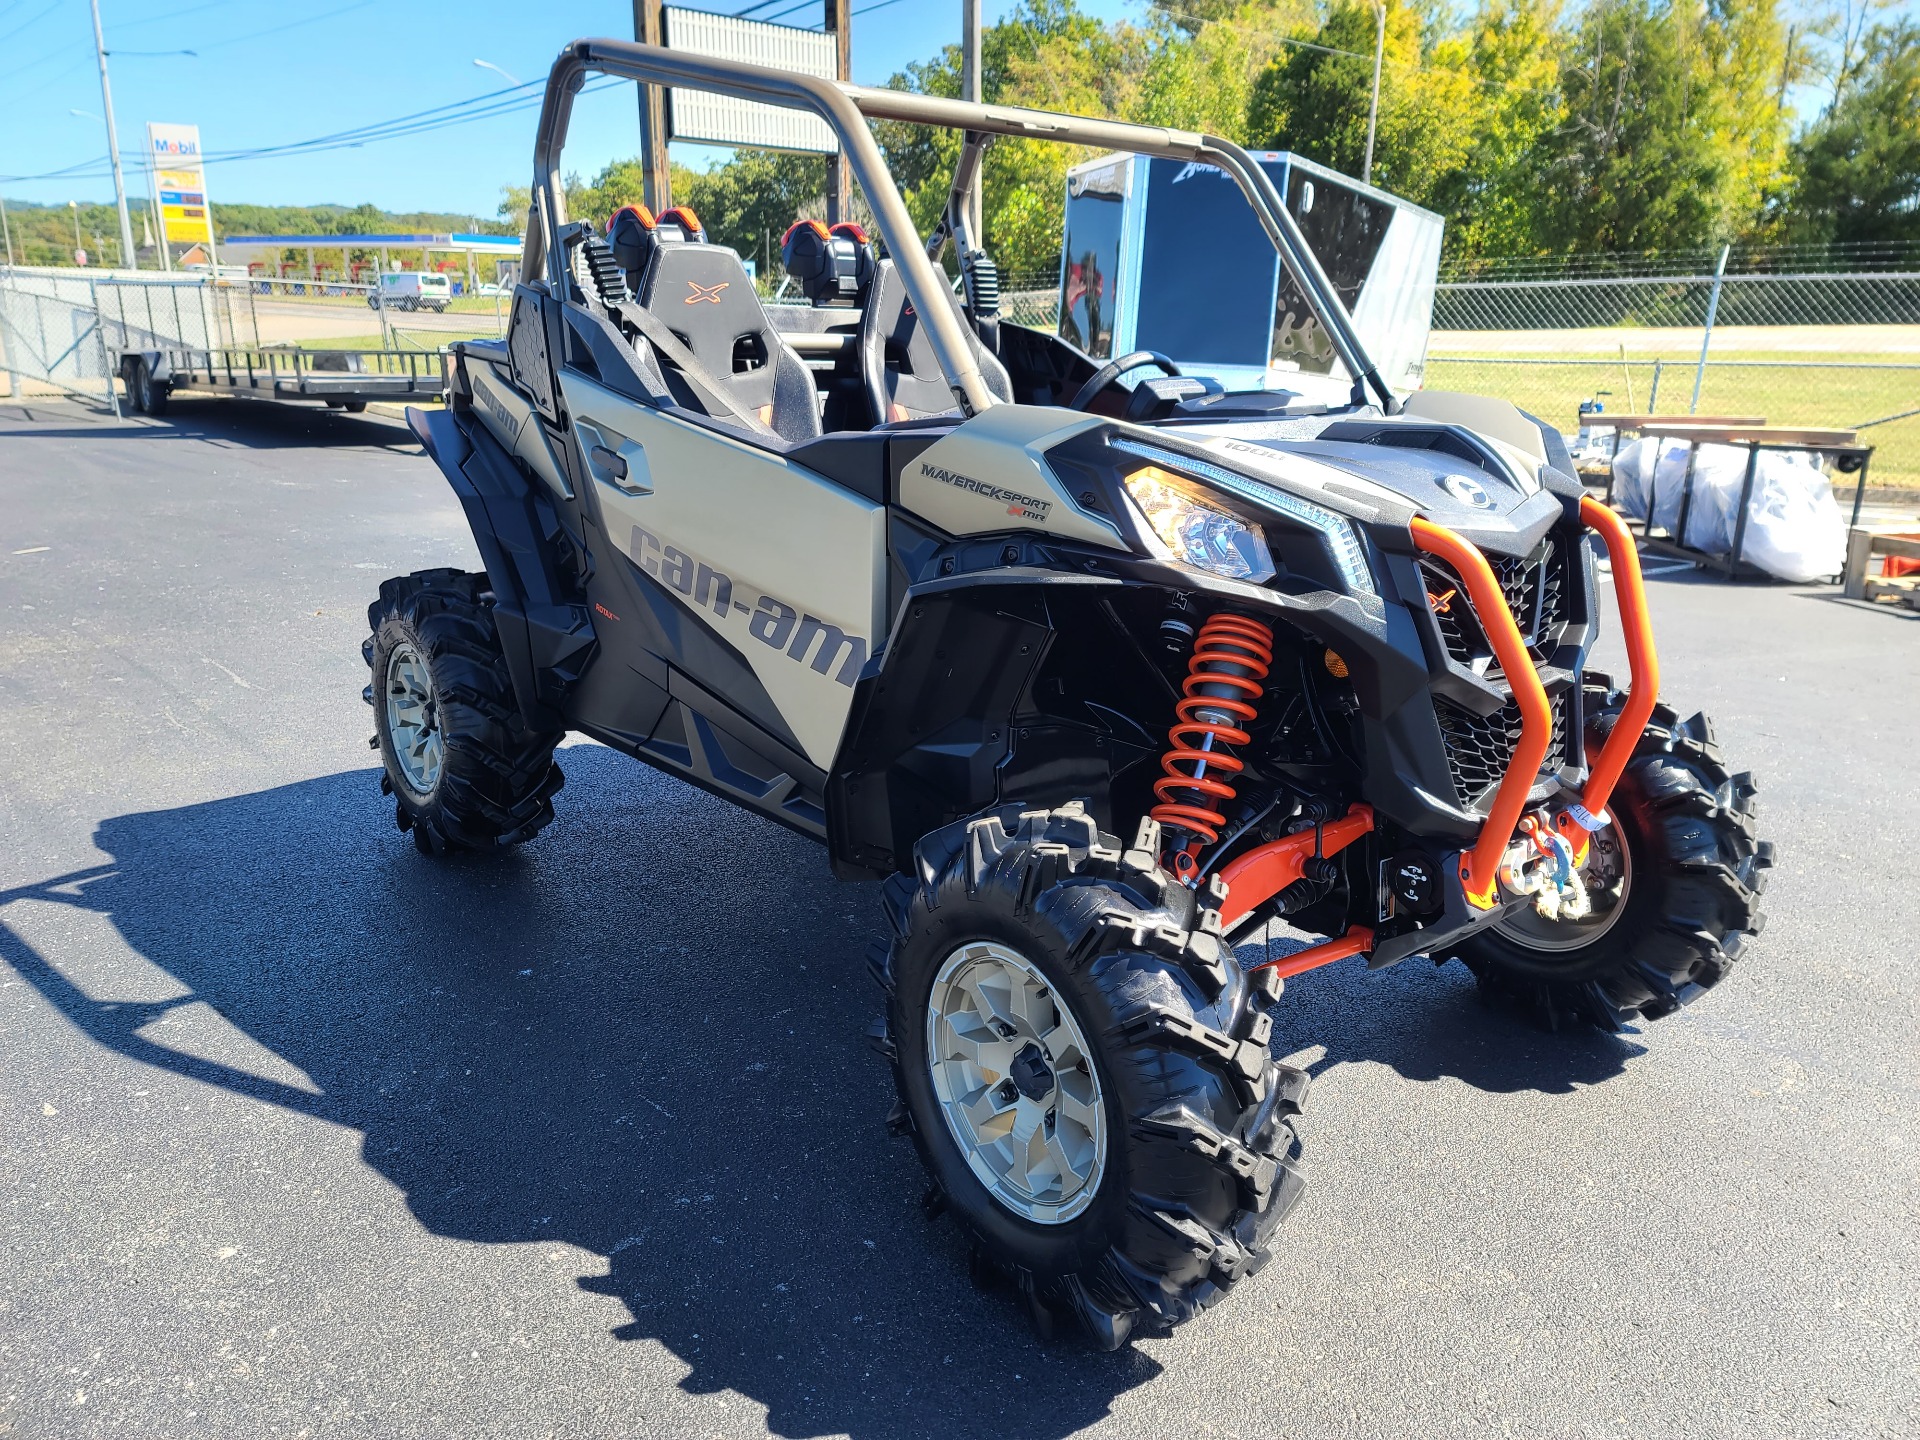 2022 Can-Am Maverick Sport X MR 1000R in Clinton, Tennessee - Photo 1